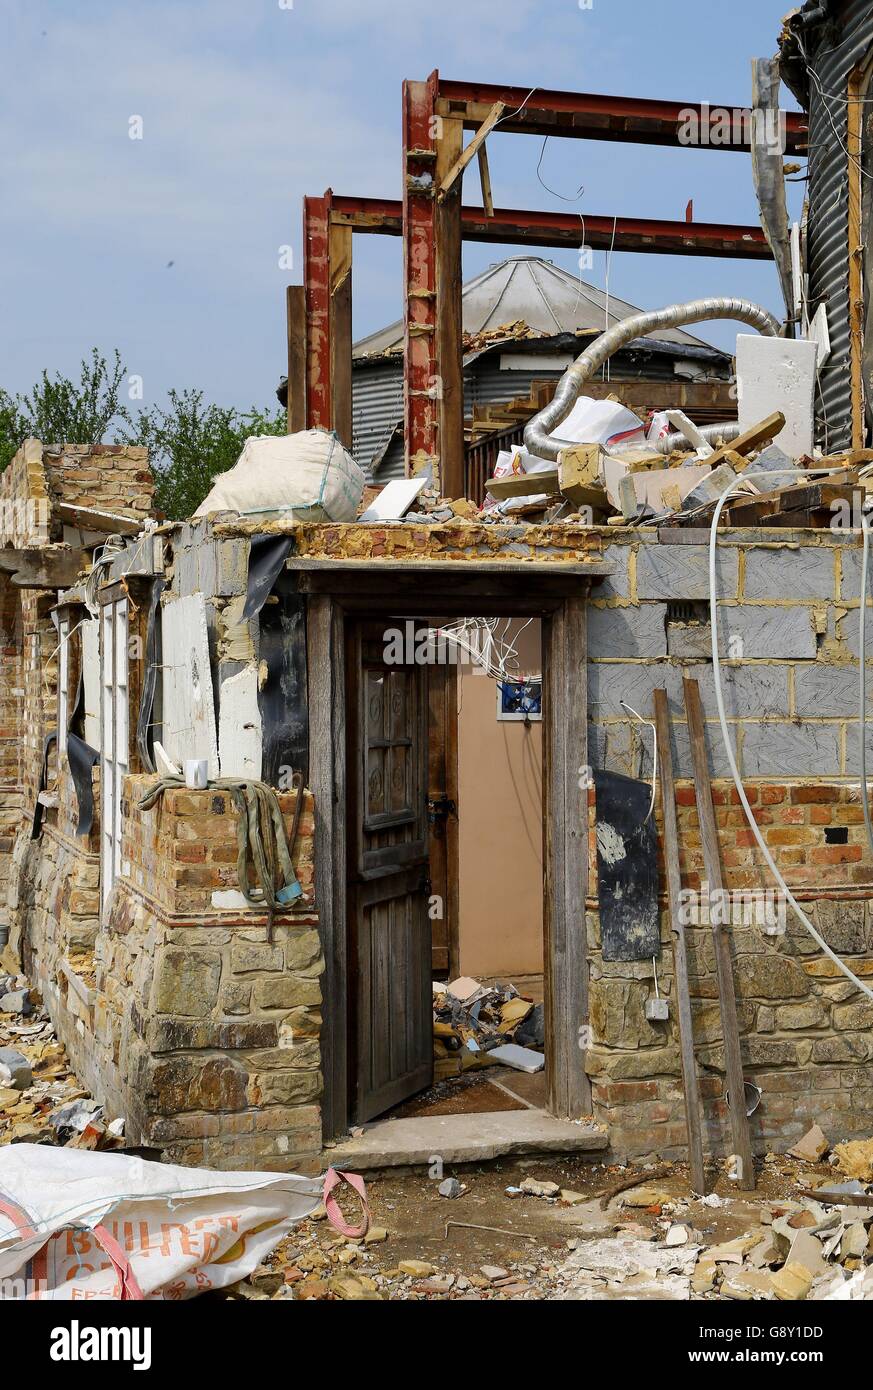 A view of the home of cattle farmer Robert Fidler on his farm in Salfords near Redhill in Surrey, as the process of demolishing the property continues after he lost a ten year court battle to save the property. Stock Photo